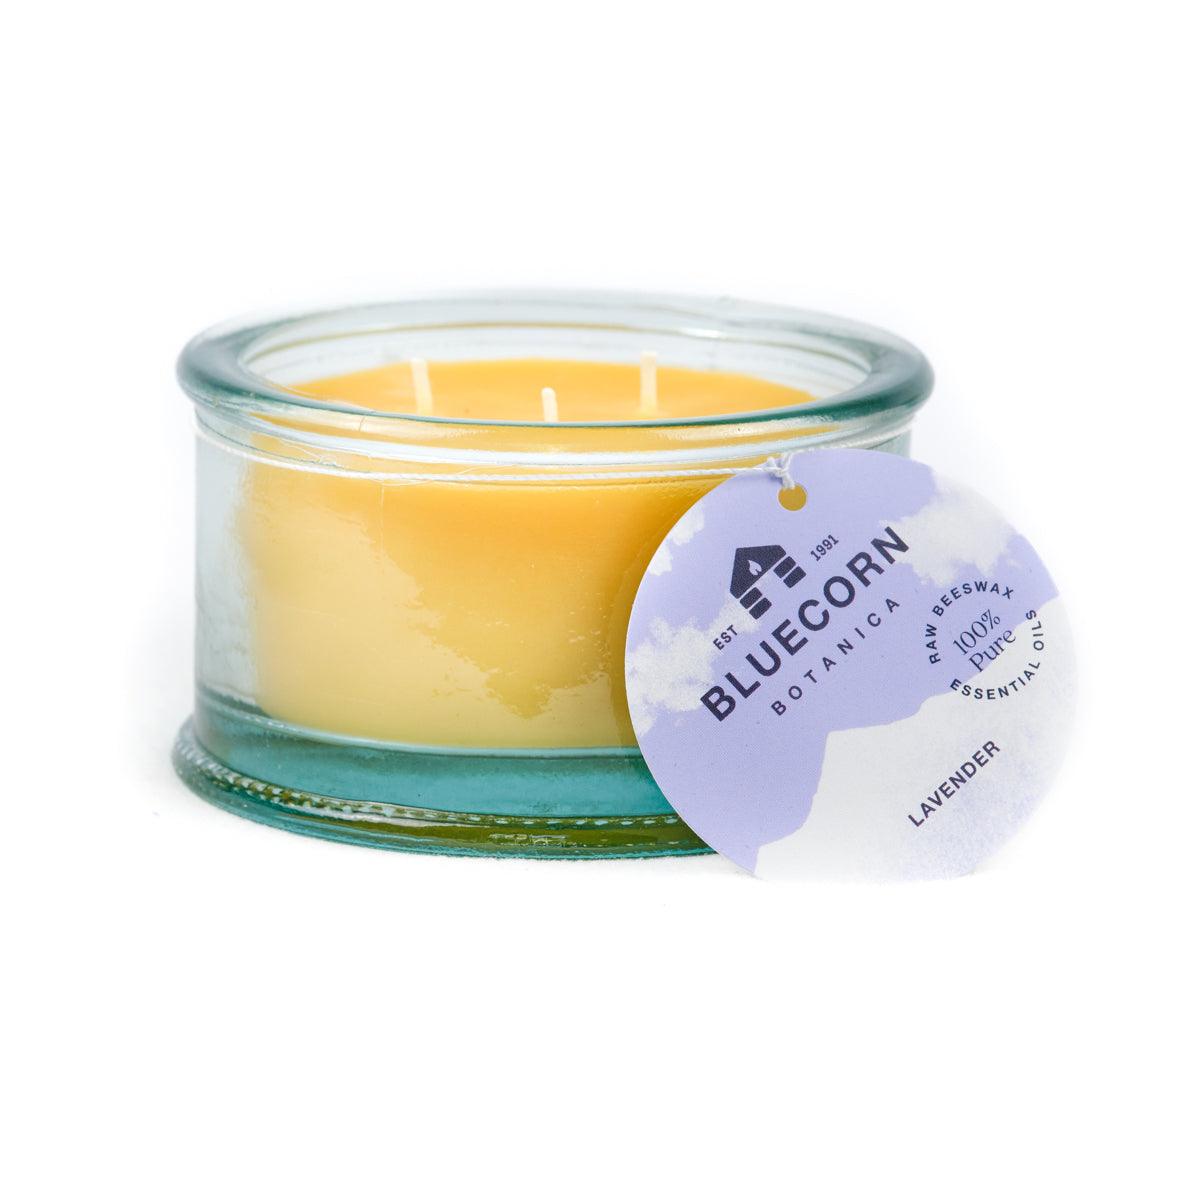 Bluecorn Botanica 100% Pure Beeswax Lavender 10oz 3-Wick Glass Candle. Wax is golden in color and glass is clear colored, with a white back drop. Features purple Bluecorn Botanica hang tag printed on 100% recyled paper with Bluecorn name and logo. Burn Time: 18 hours.  Made with 100% Pure Beeswax, 100% Pure Essentail Oils and a 100% pure cotton wick, no lead. Candles are paraffin free, clean burning and non-toxic. 